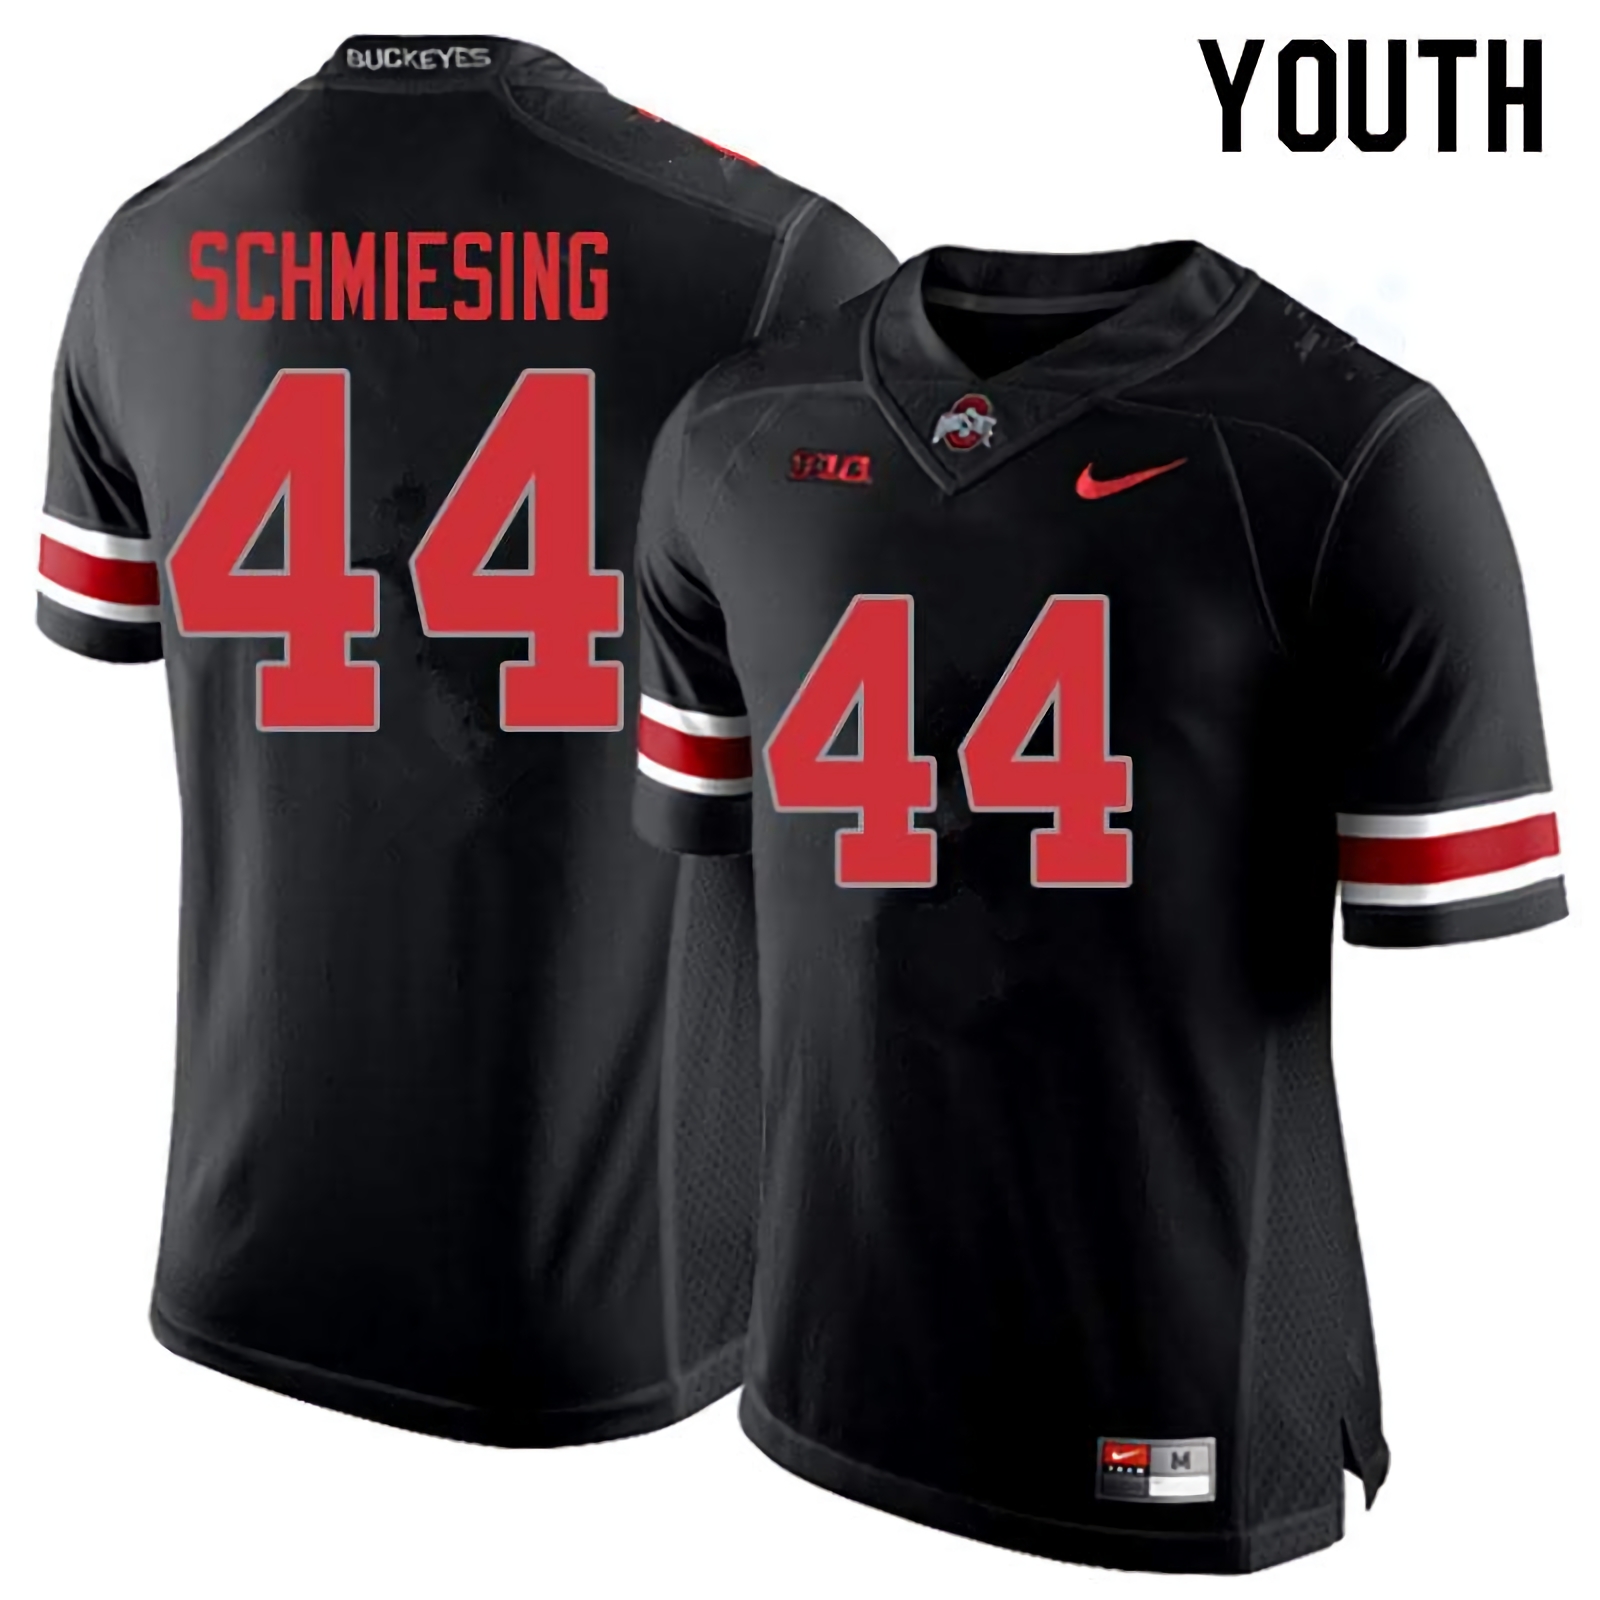 Ben Schmiesing Ohio State Buckeyes Youth NCAA #44 Nike Blackout College Stitched Football Jersey DKJ6856GY